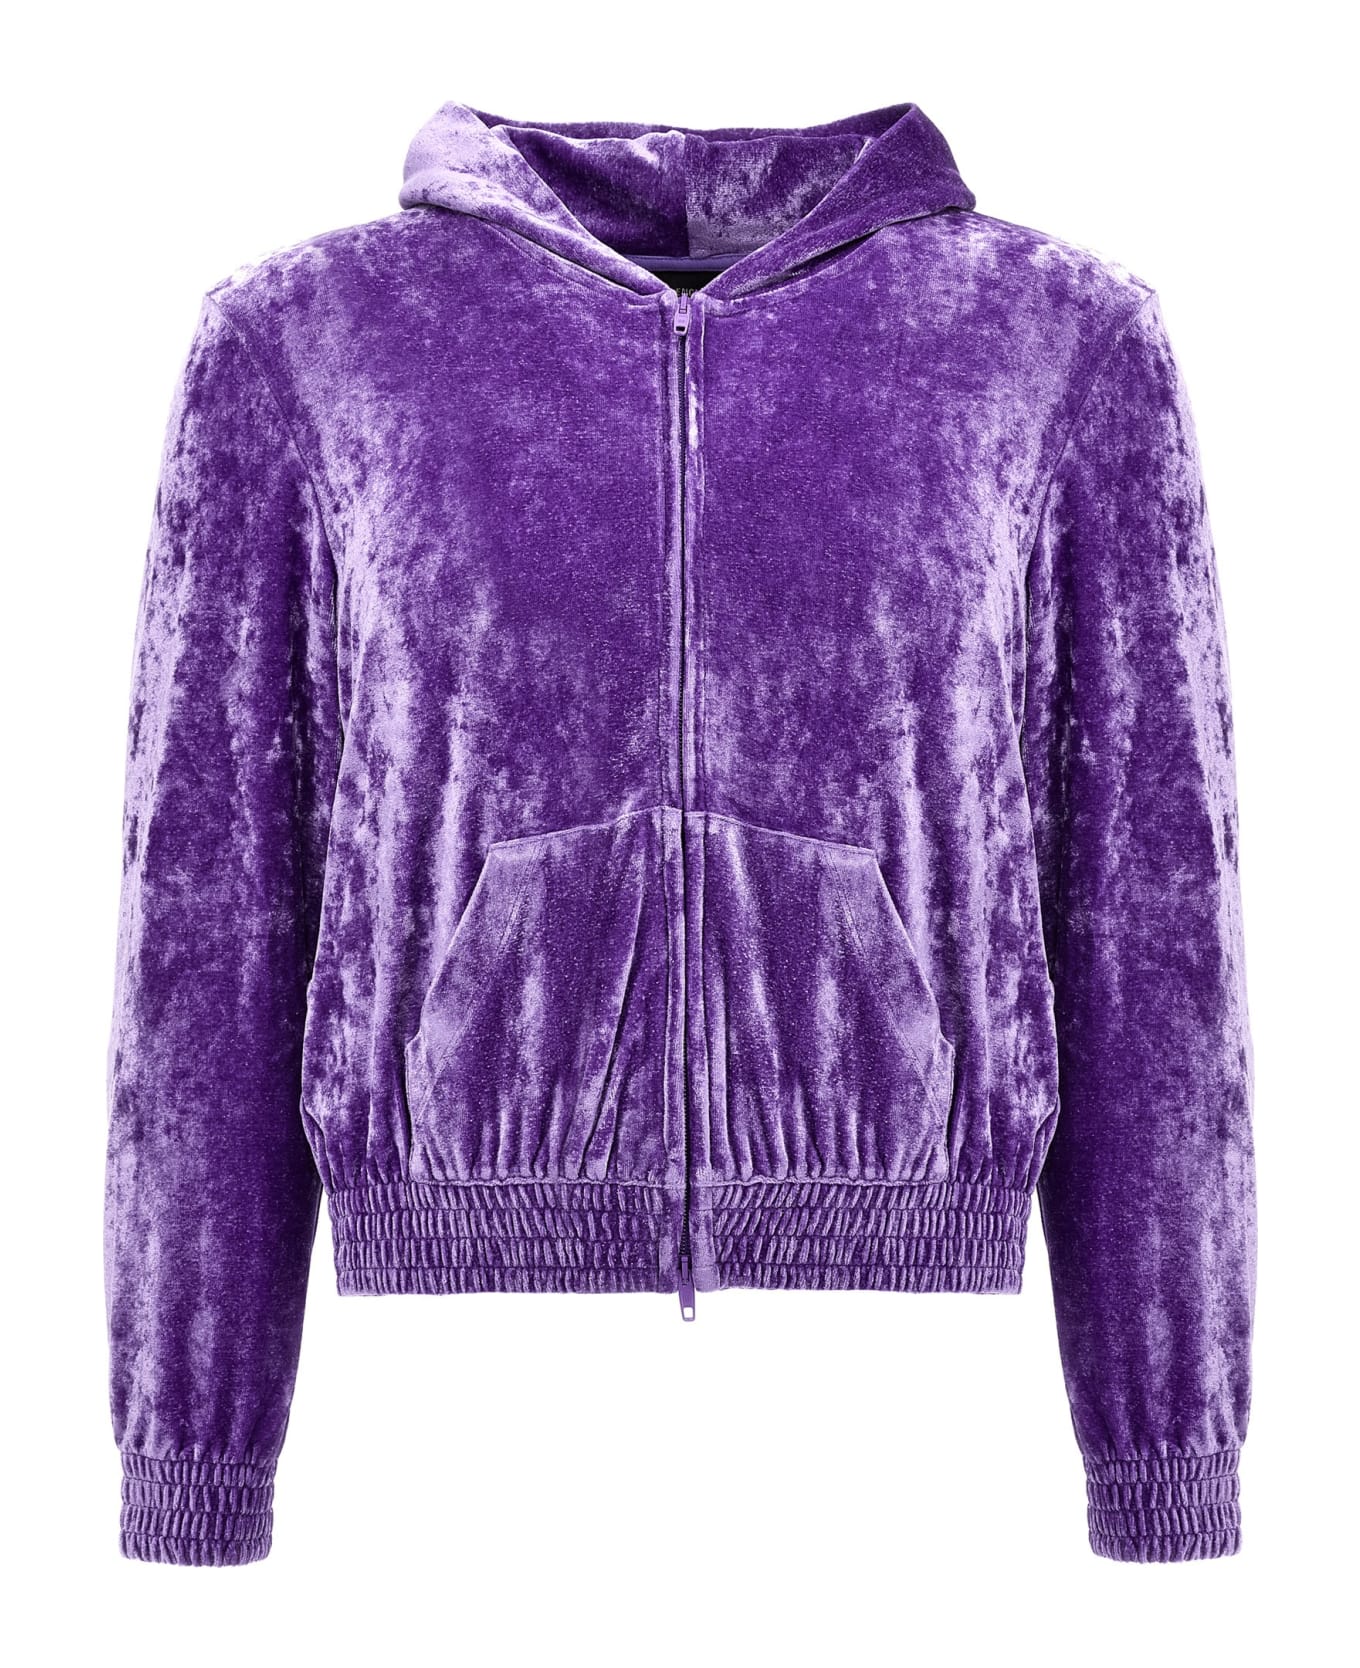 Balenciaga Fitted Zip Up Hoodie - Lilac